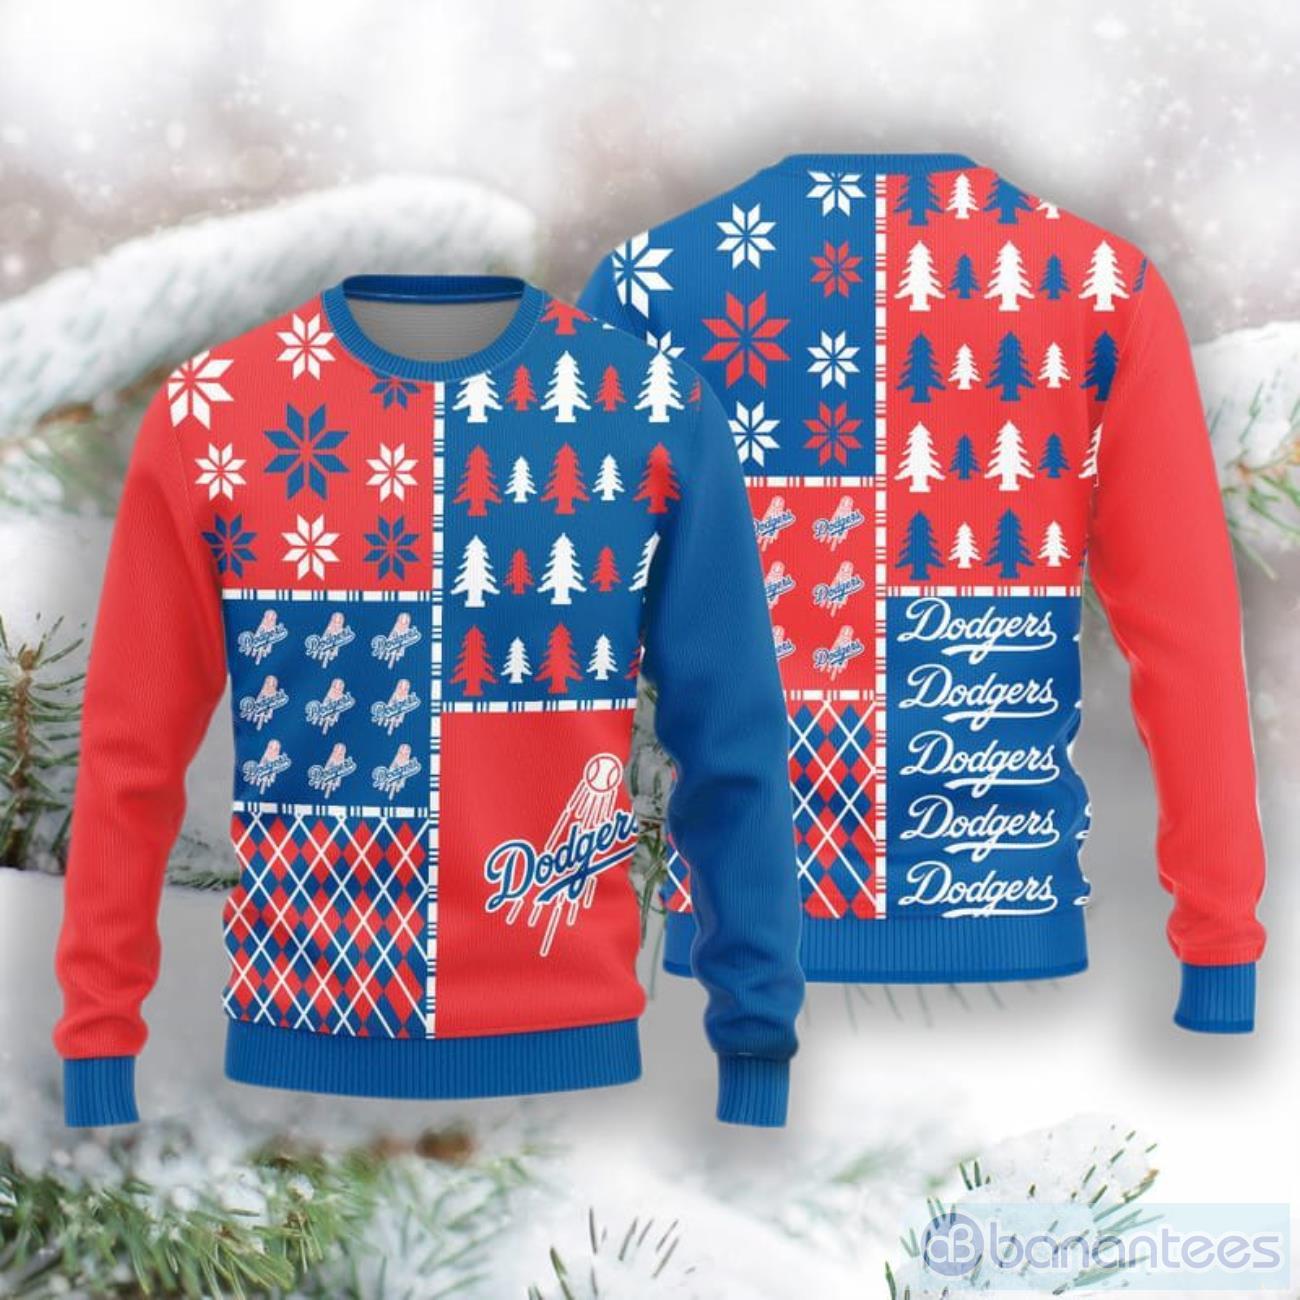 Los Angeles Dodgers MM Logo Knitted Pattern Ugly Christmas Sweater -  Banantees